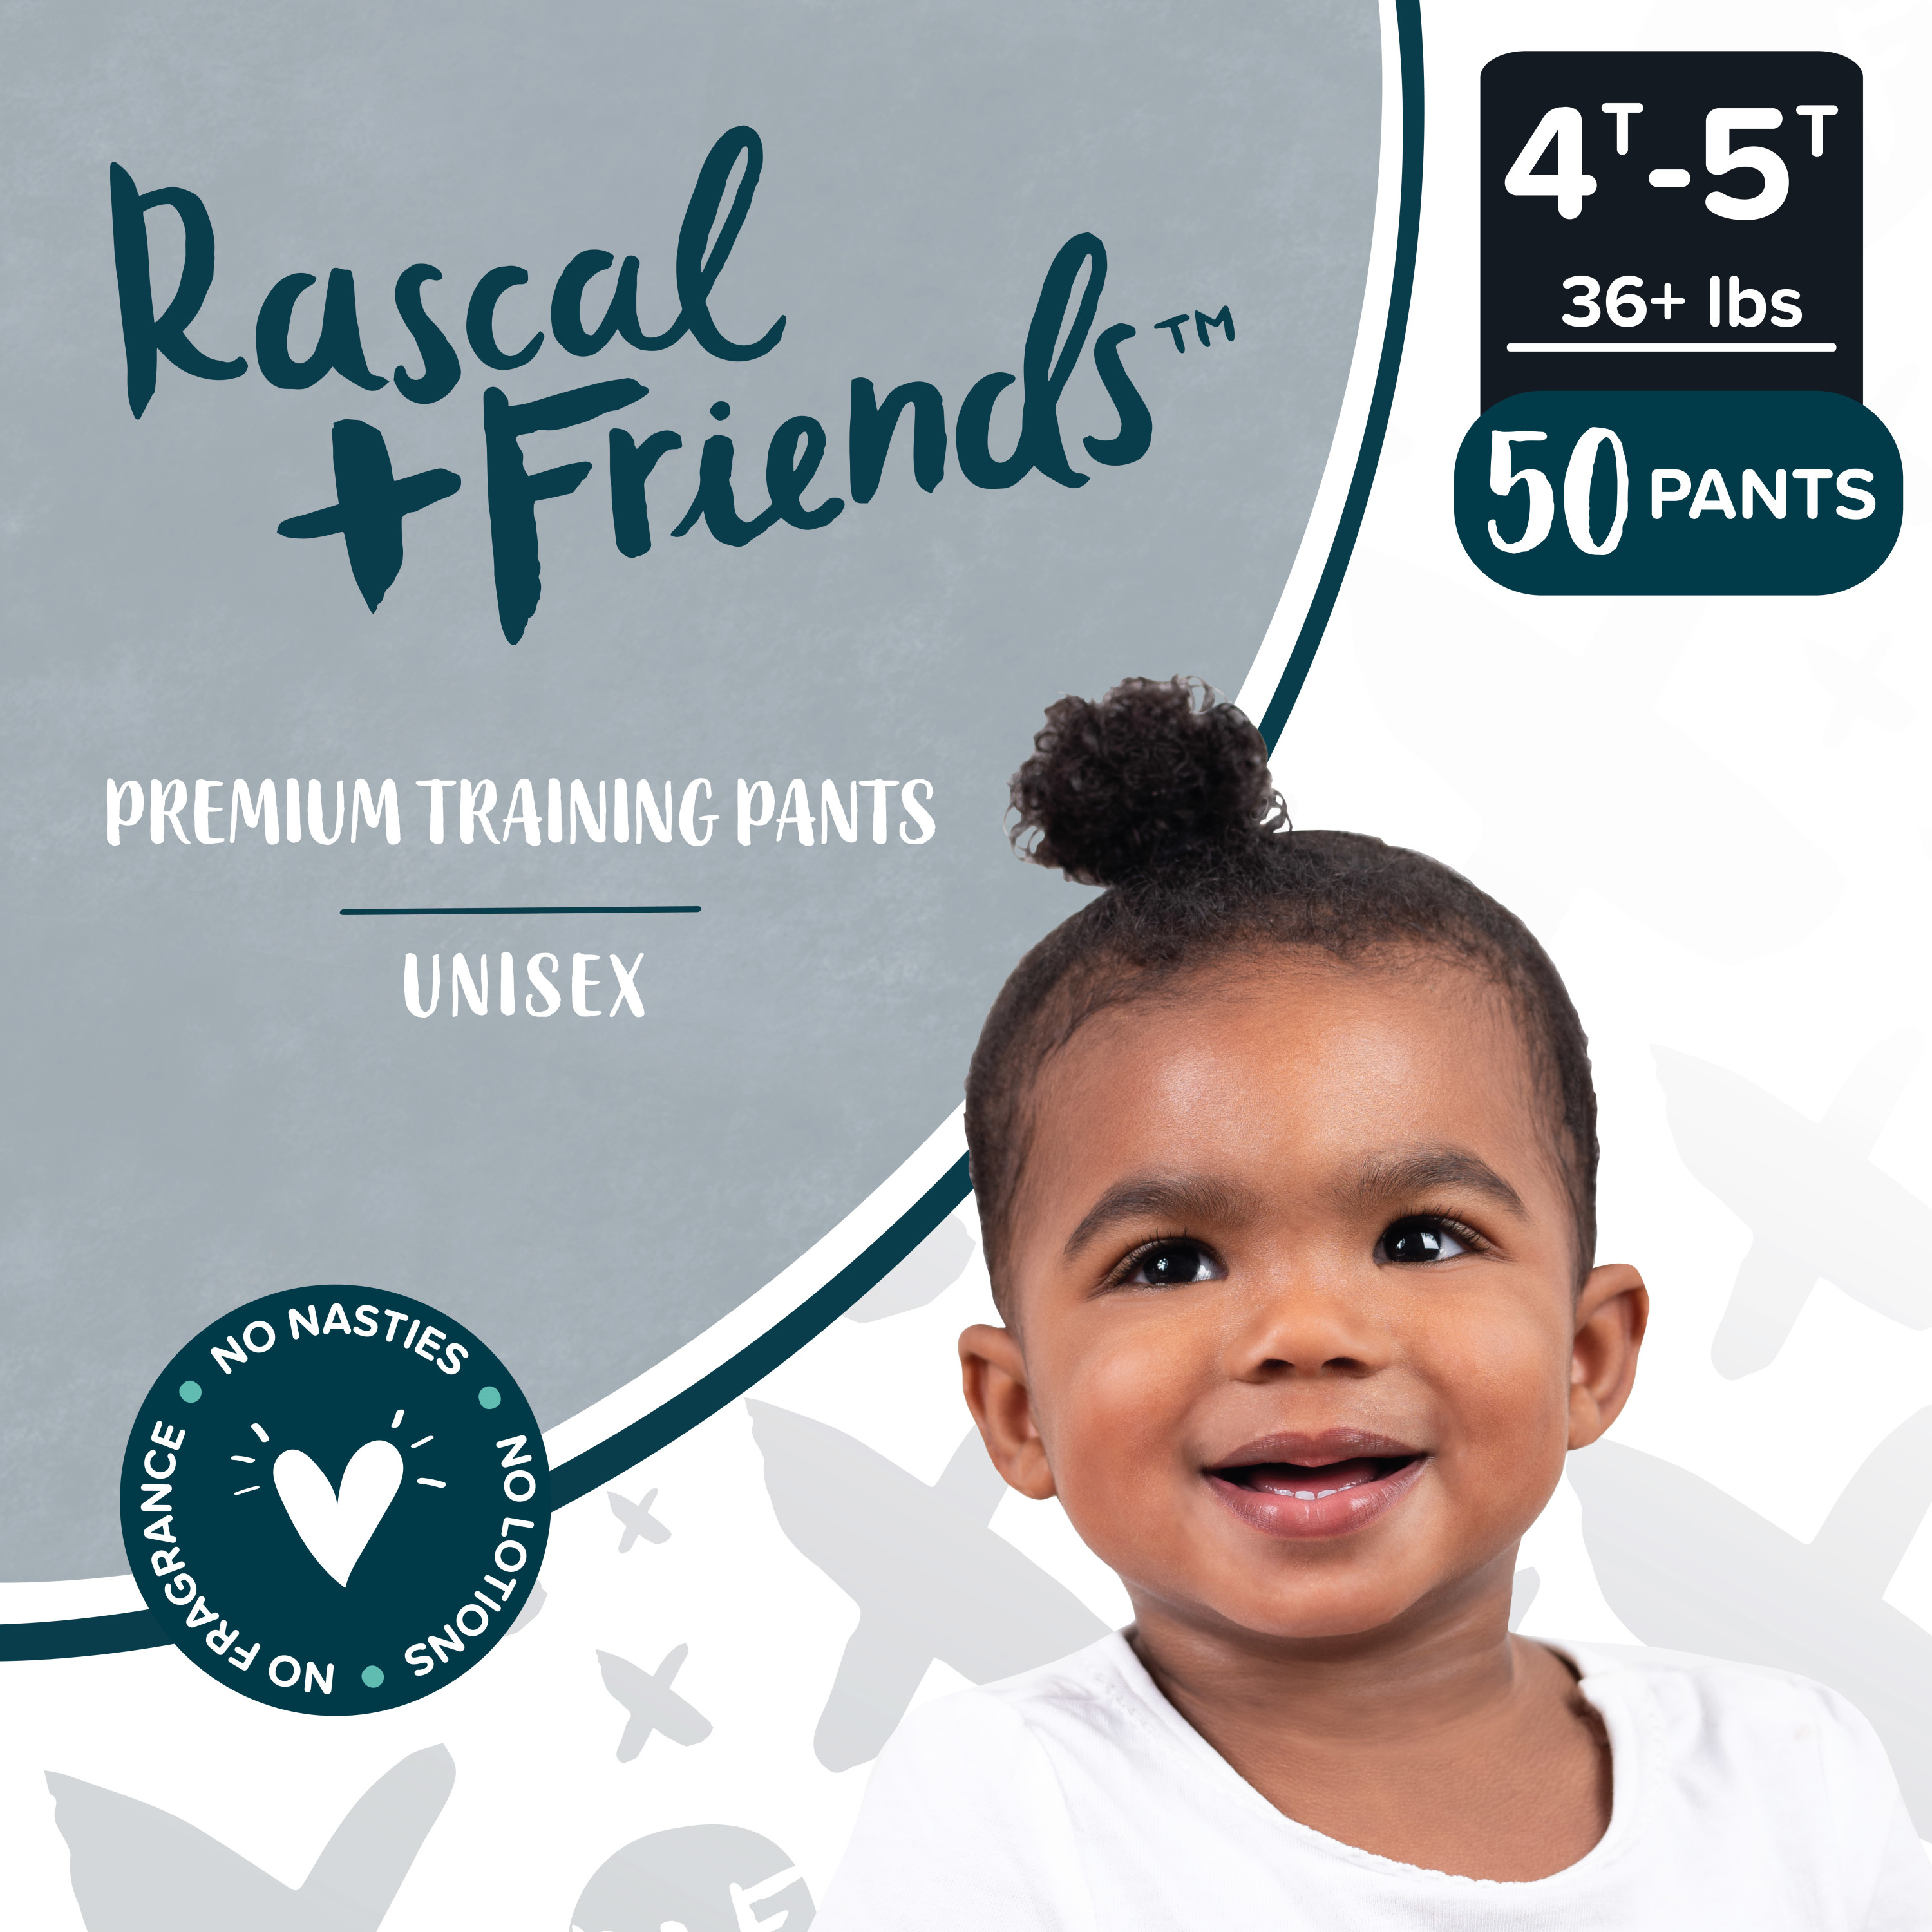 Rascal + Friends Premium Training Pants 4T-5T, 50 Count (Select for More Options) - image 3 of 9